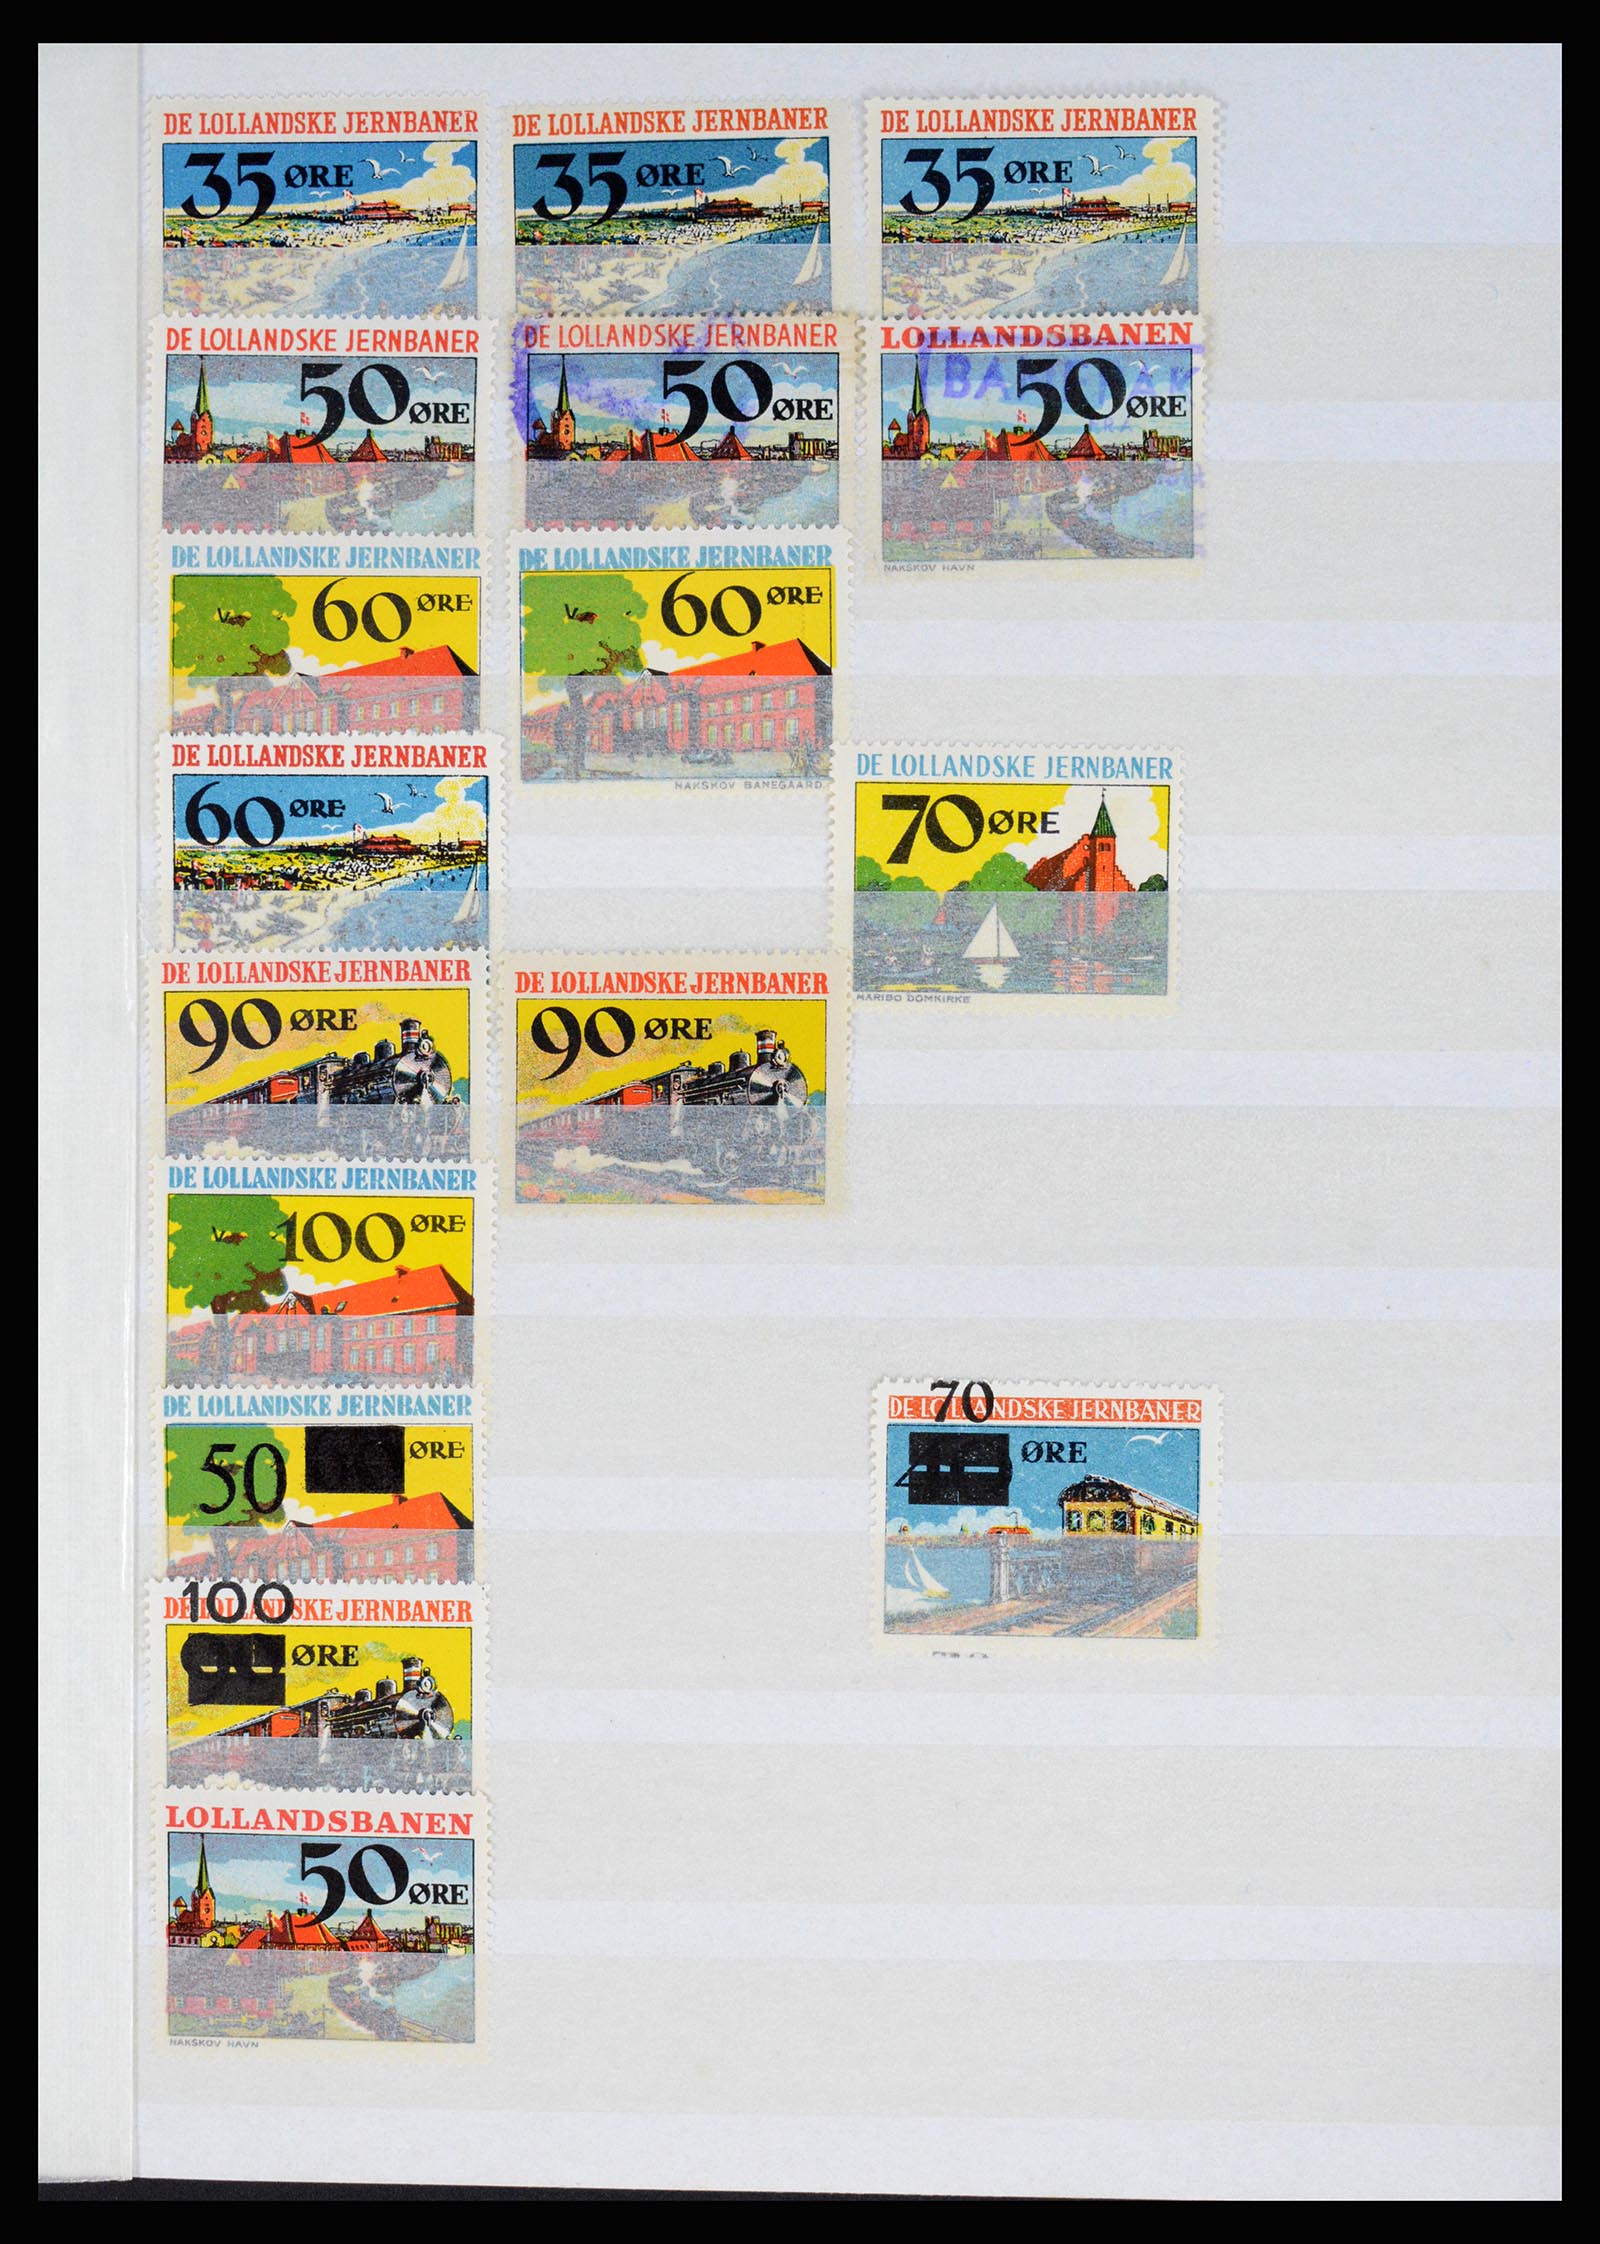 36982 039 - Stamp collection 36982 Denmark railroad stamps.